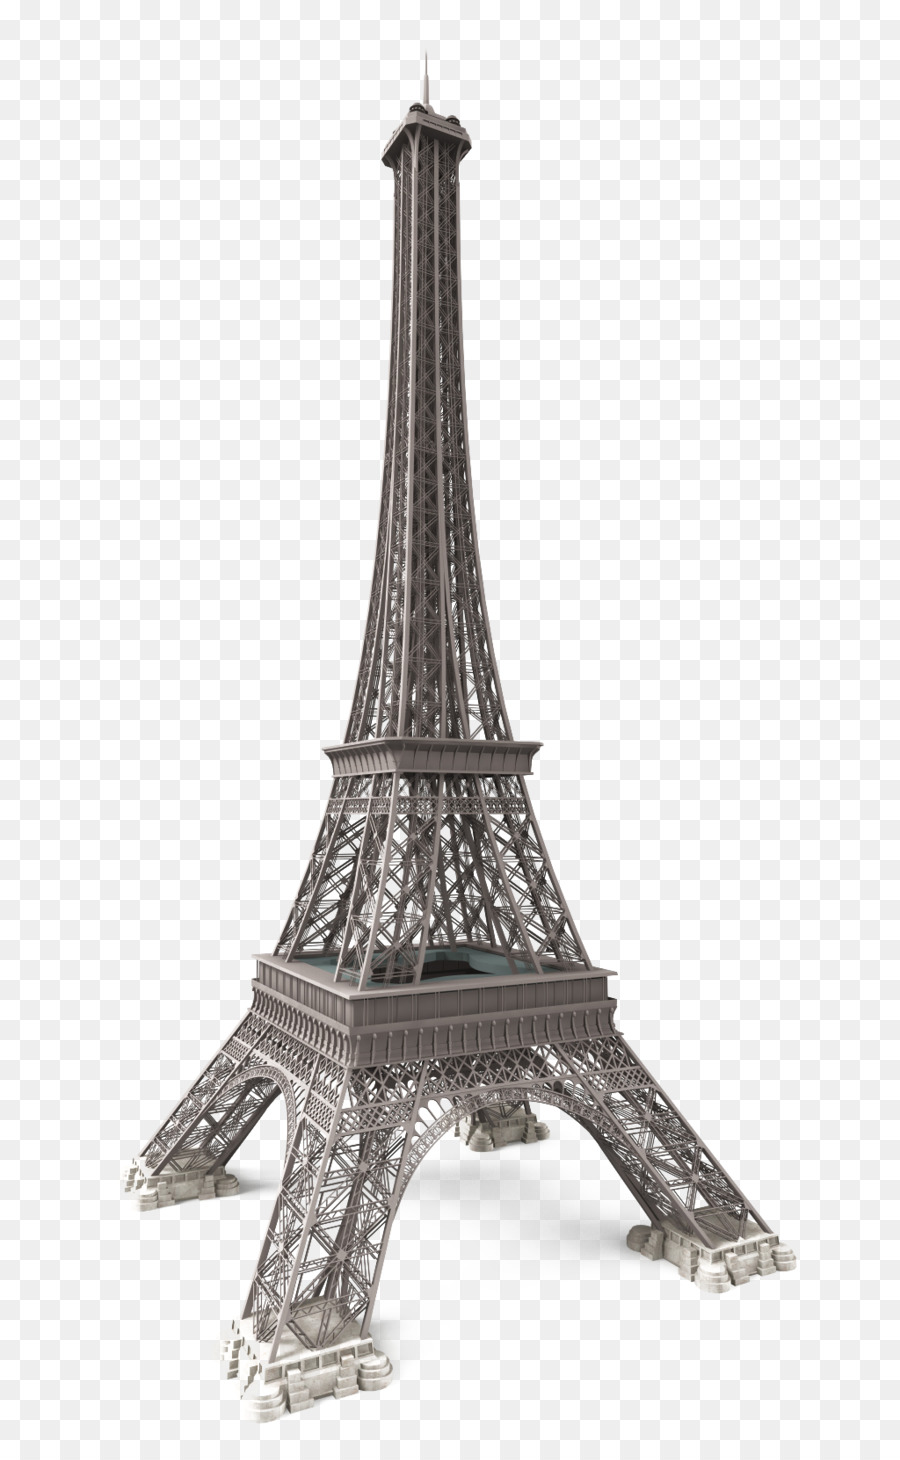 Eiffel Tower 3D computer graphics 3D modeling 3D printing - Exquisite Eiffel Tower png download - 1024*1656 - Free Transparent Eiffel Tower png Download.